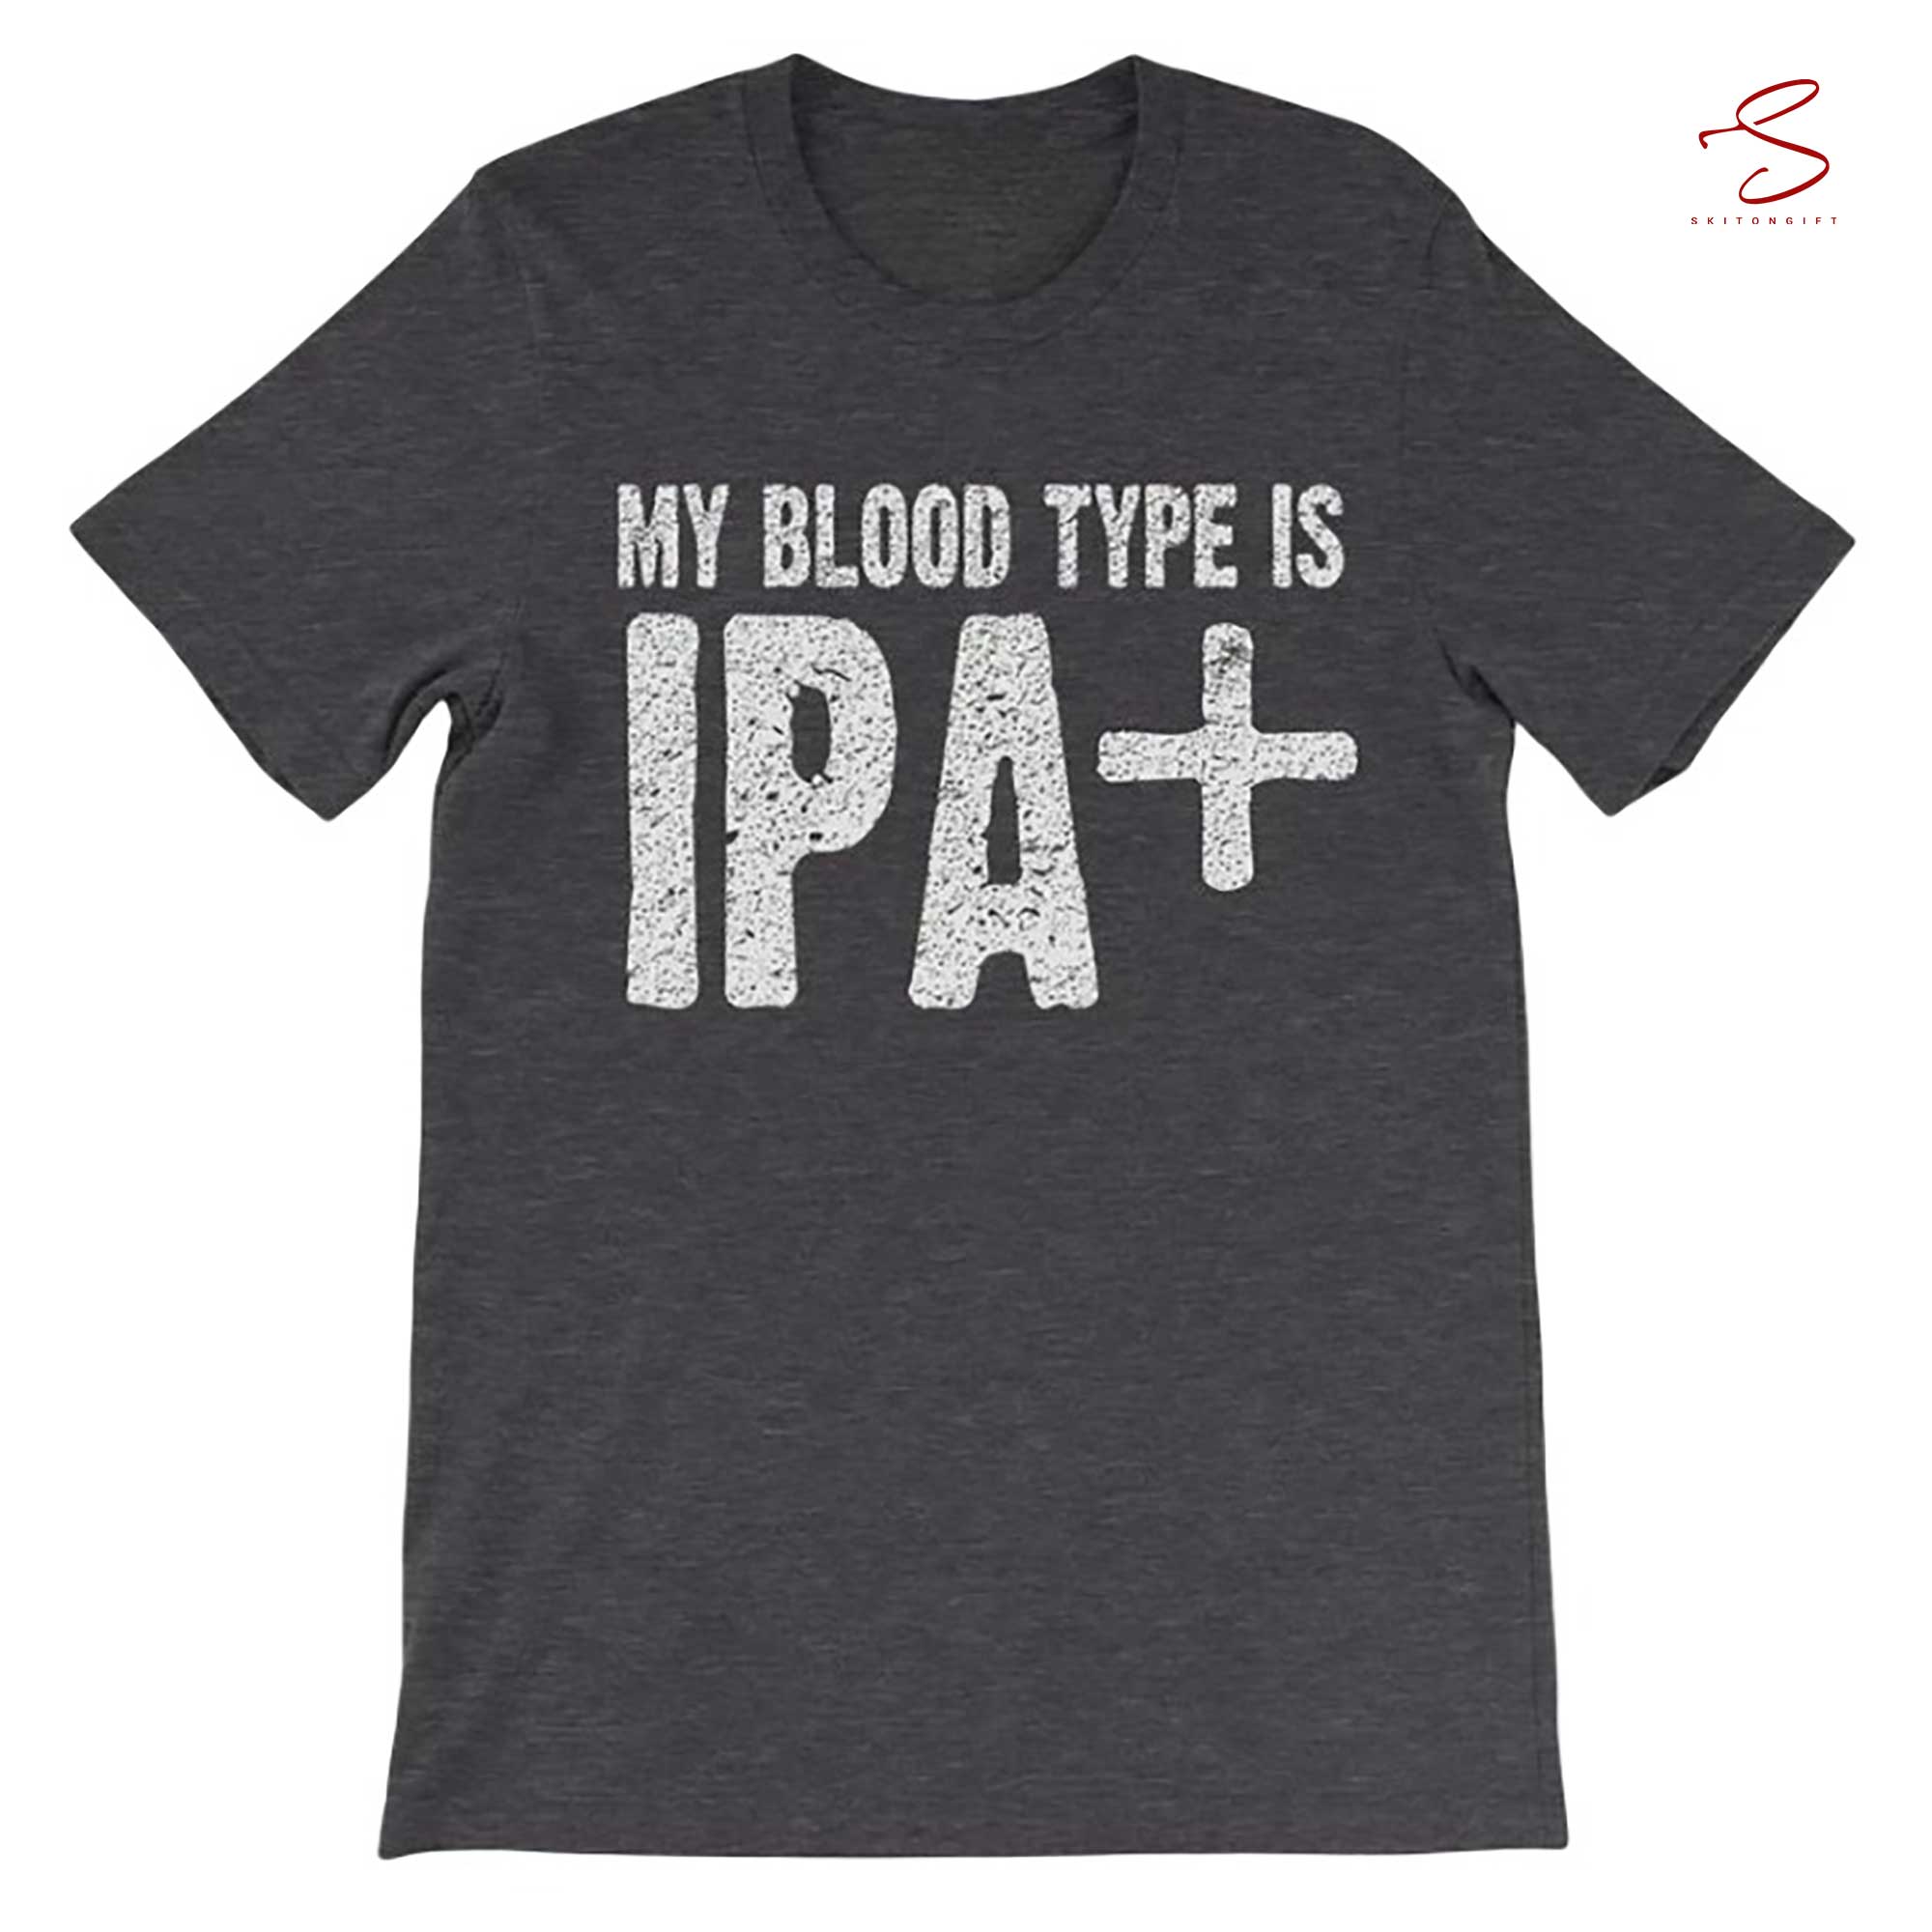 Skitongift Original And Best Ipa Shirt Bloodtype Is Ipa With Free Shipping For Homebrewer Or Beer Lover Funny Shirts Long Sleeve Tee Hoody Hoodie